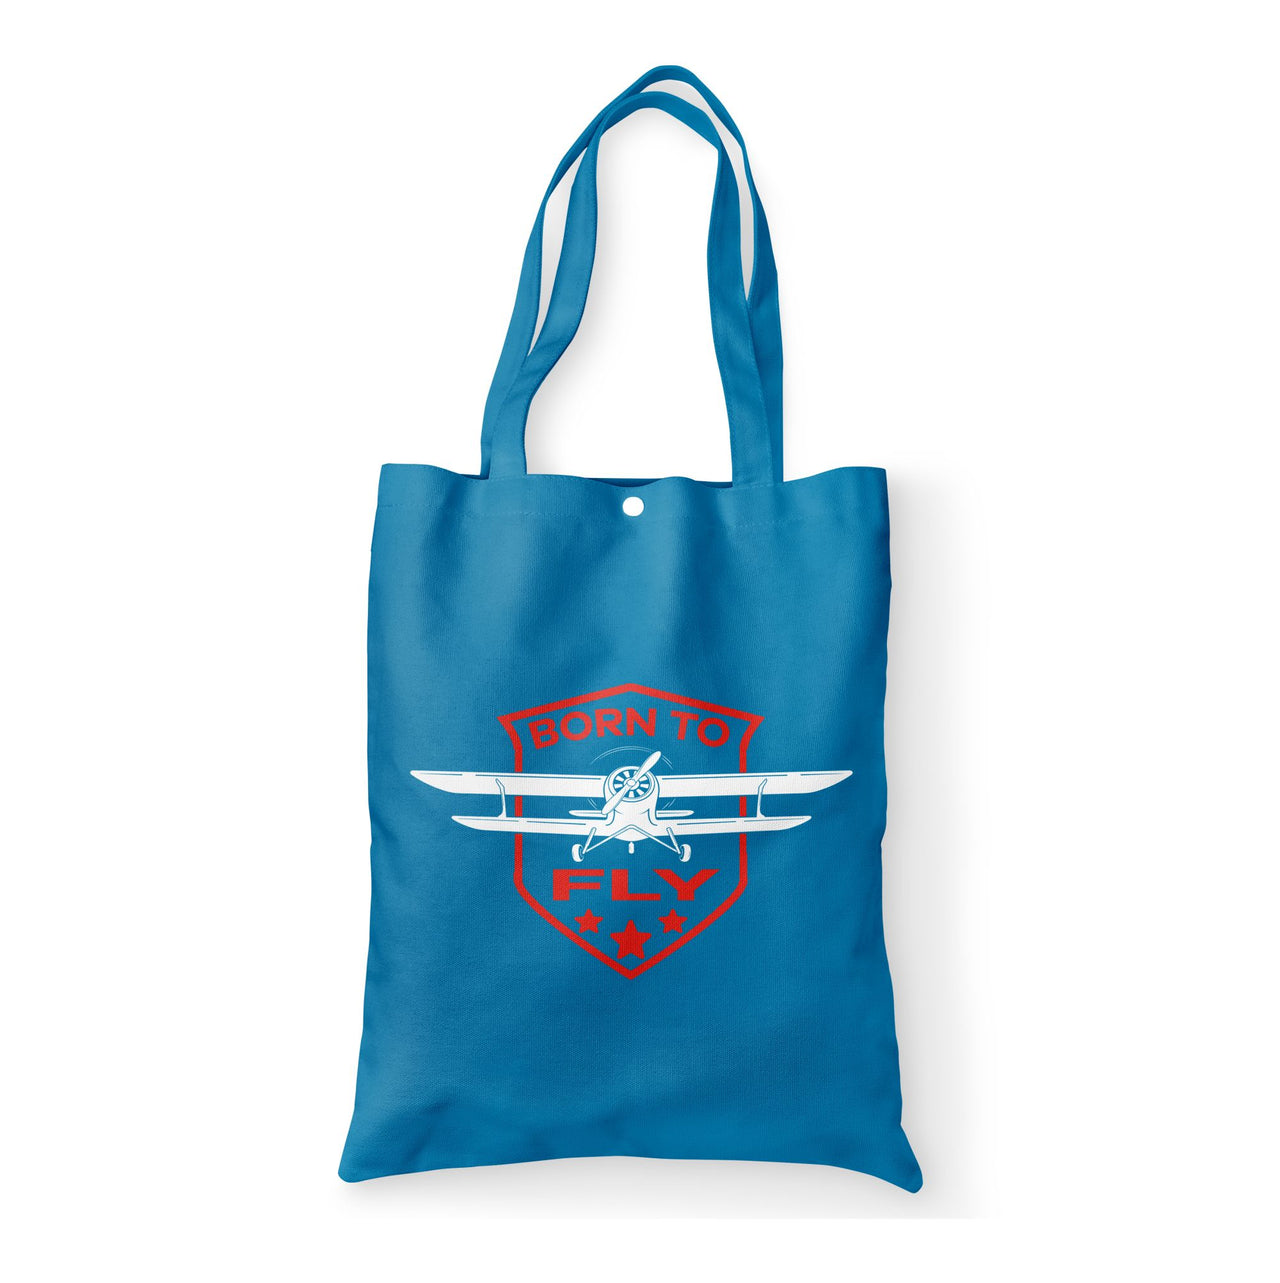 Super Born To Fly Designed Tote Bags